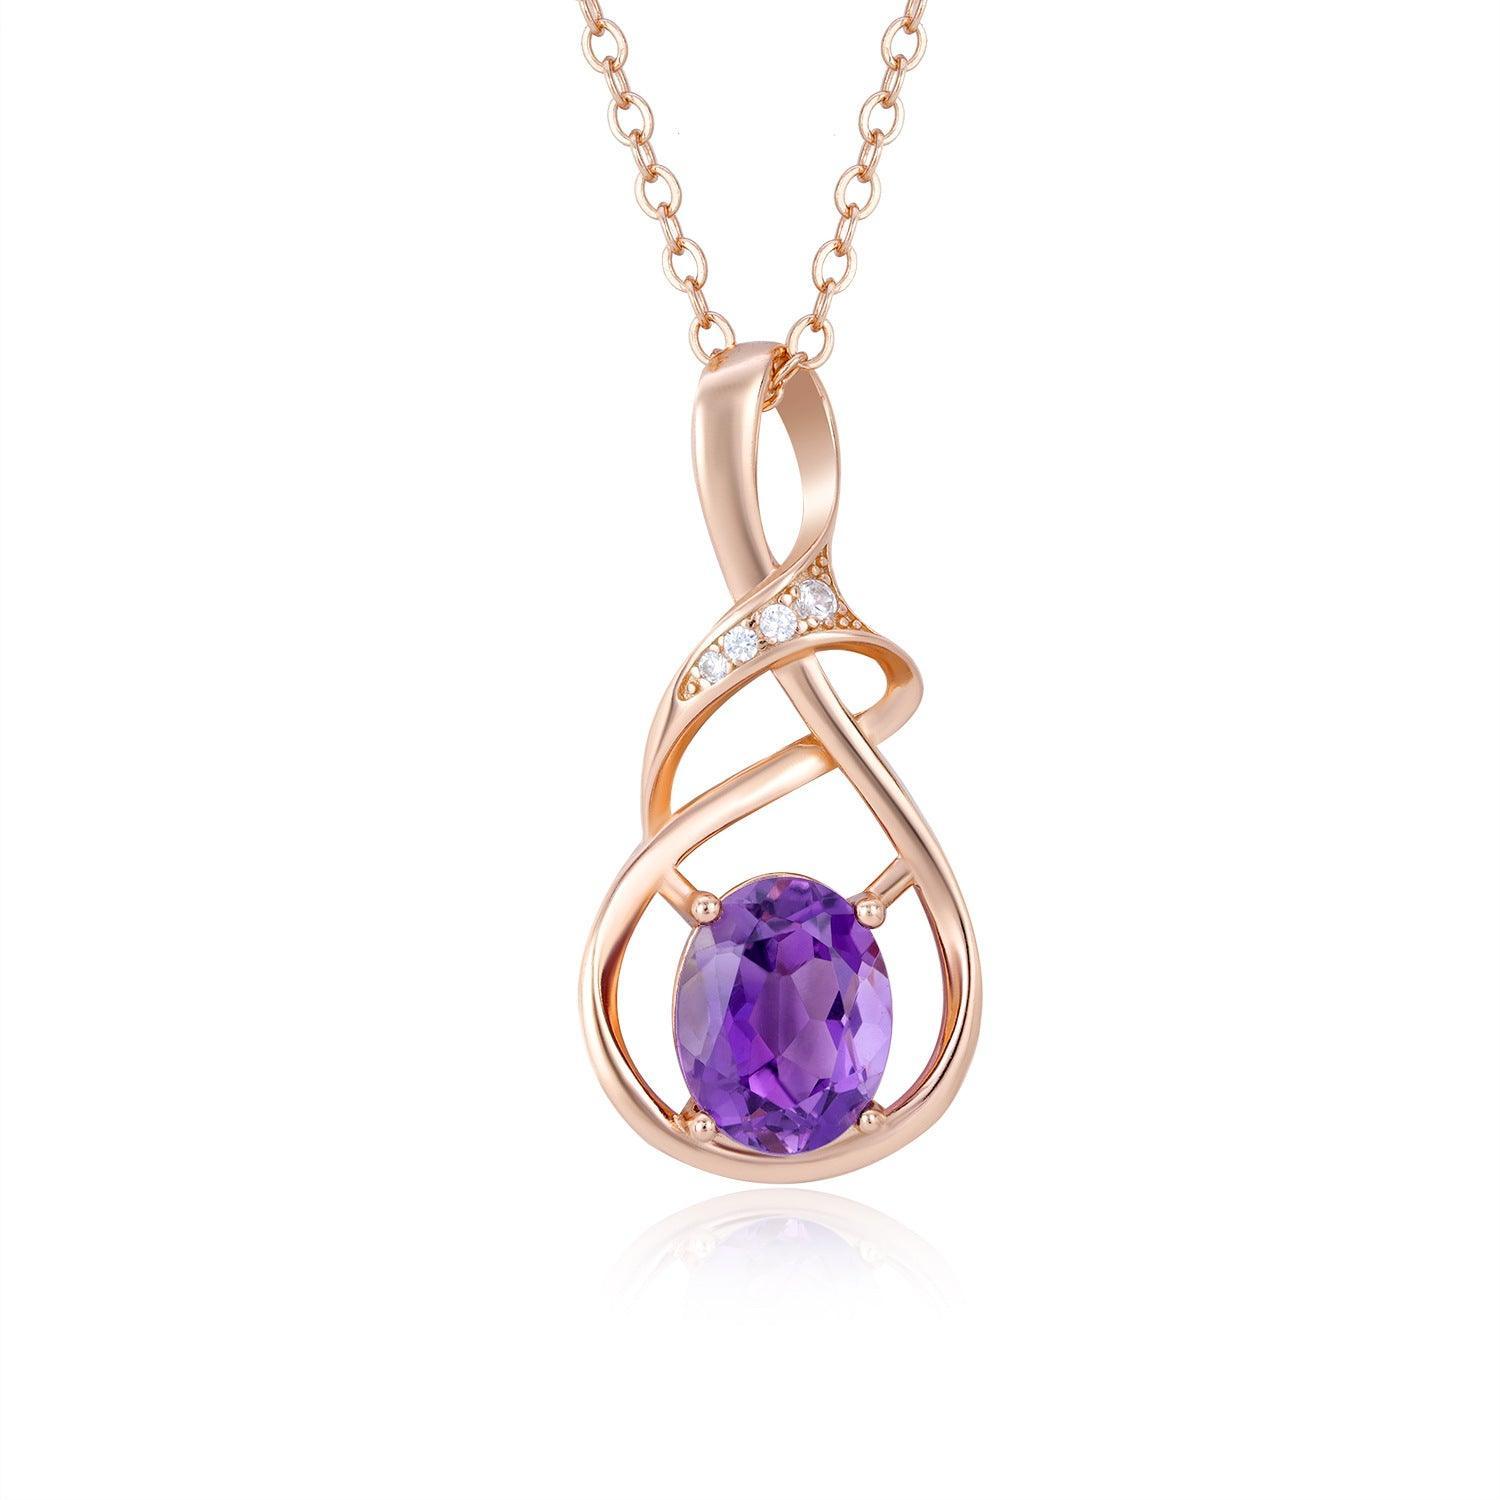 Amethyst S925 Silver Inlaid Pendant Necklace in 2023 | Amethyst S925 Silver Inlaid Pendant Necklace - undefined | Amethyst Inlaid Pendant, luxury necklace, Rose Gold Necklaces, S925 Silver Inlaid Pendant Necklace | From Hunny Life | hunnylife.com